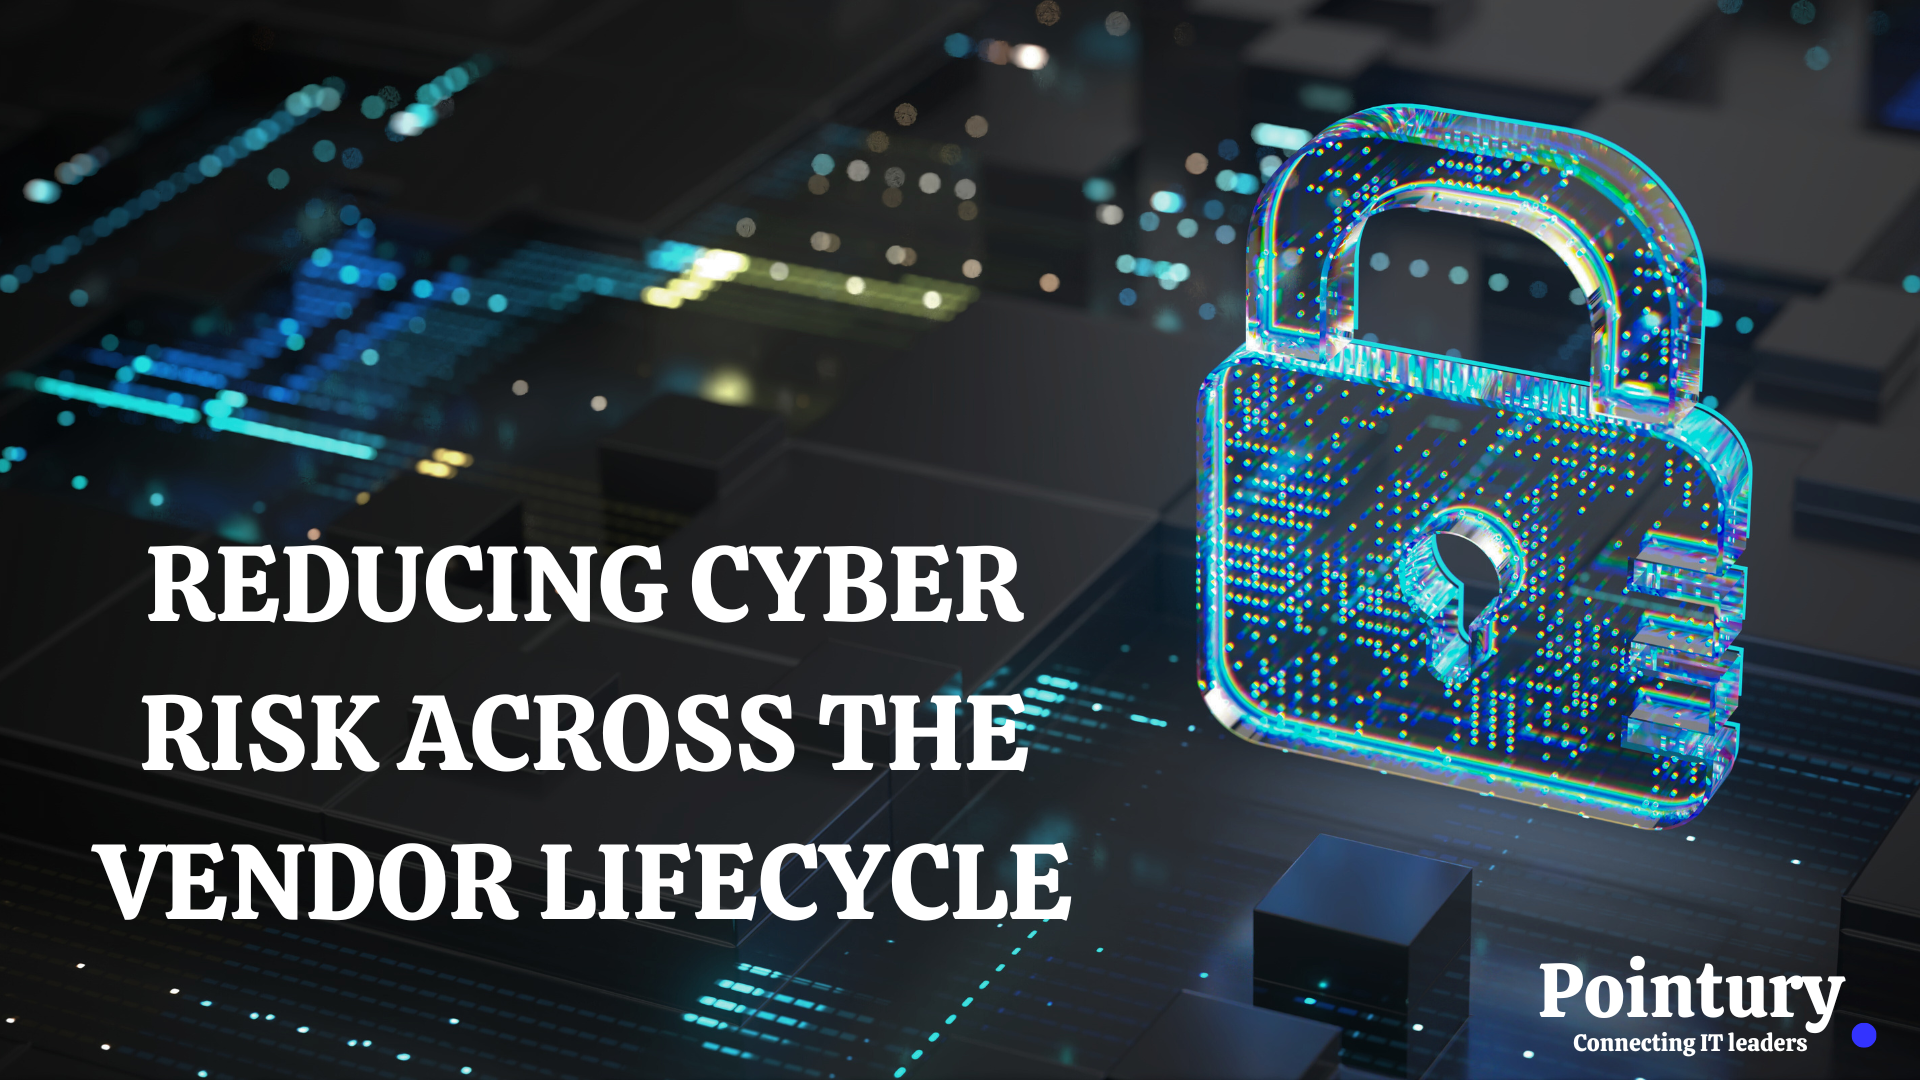 REDUCING CYBER RISK ACROSS THE VENDOR LIFECYCLE